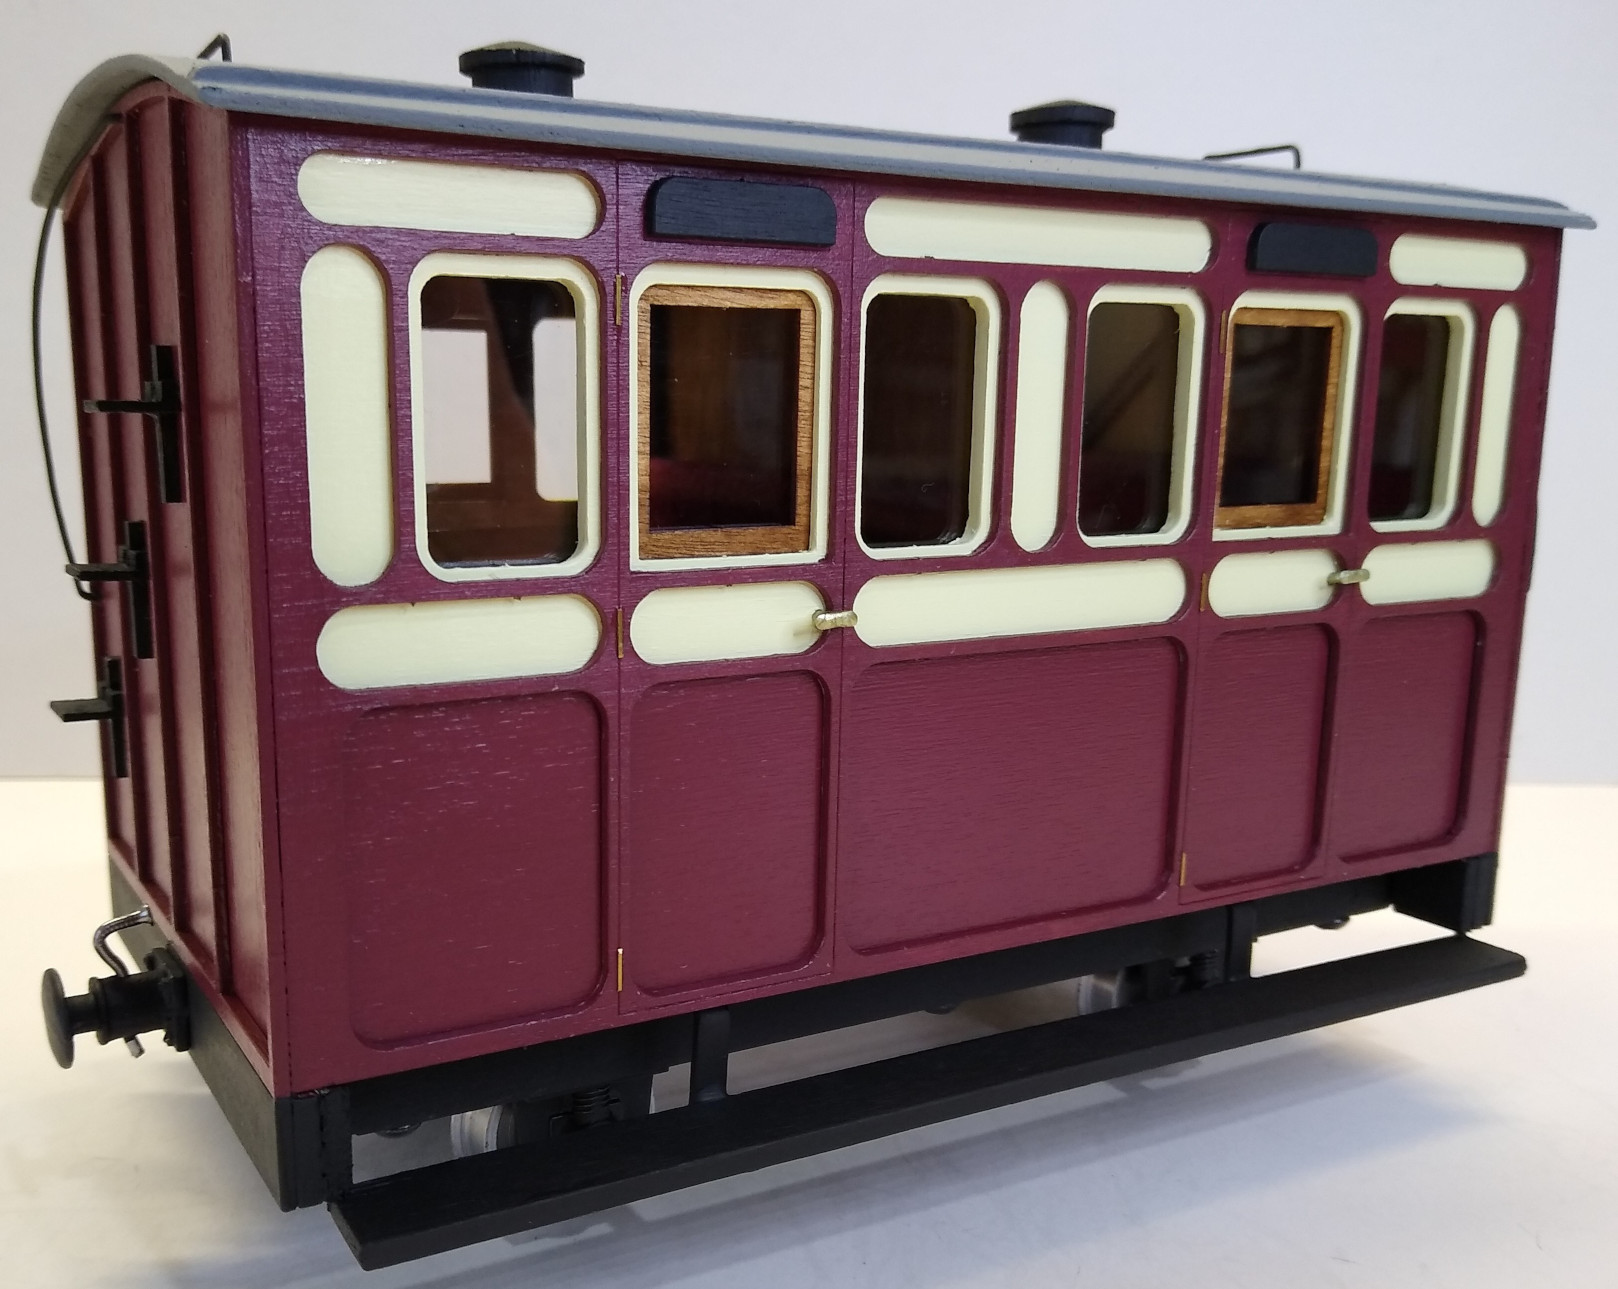 Rolling Stock Classic Freelance Blood and Custard 2 compartment